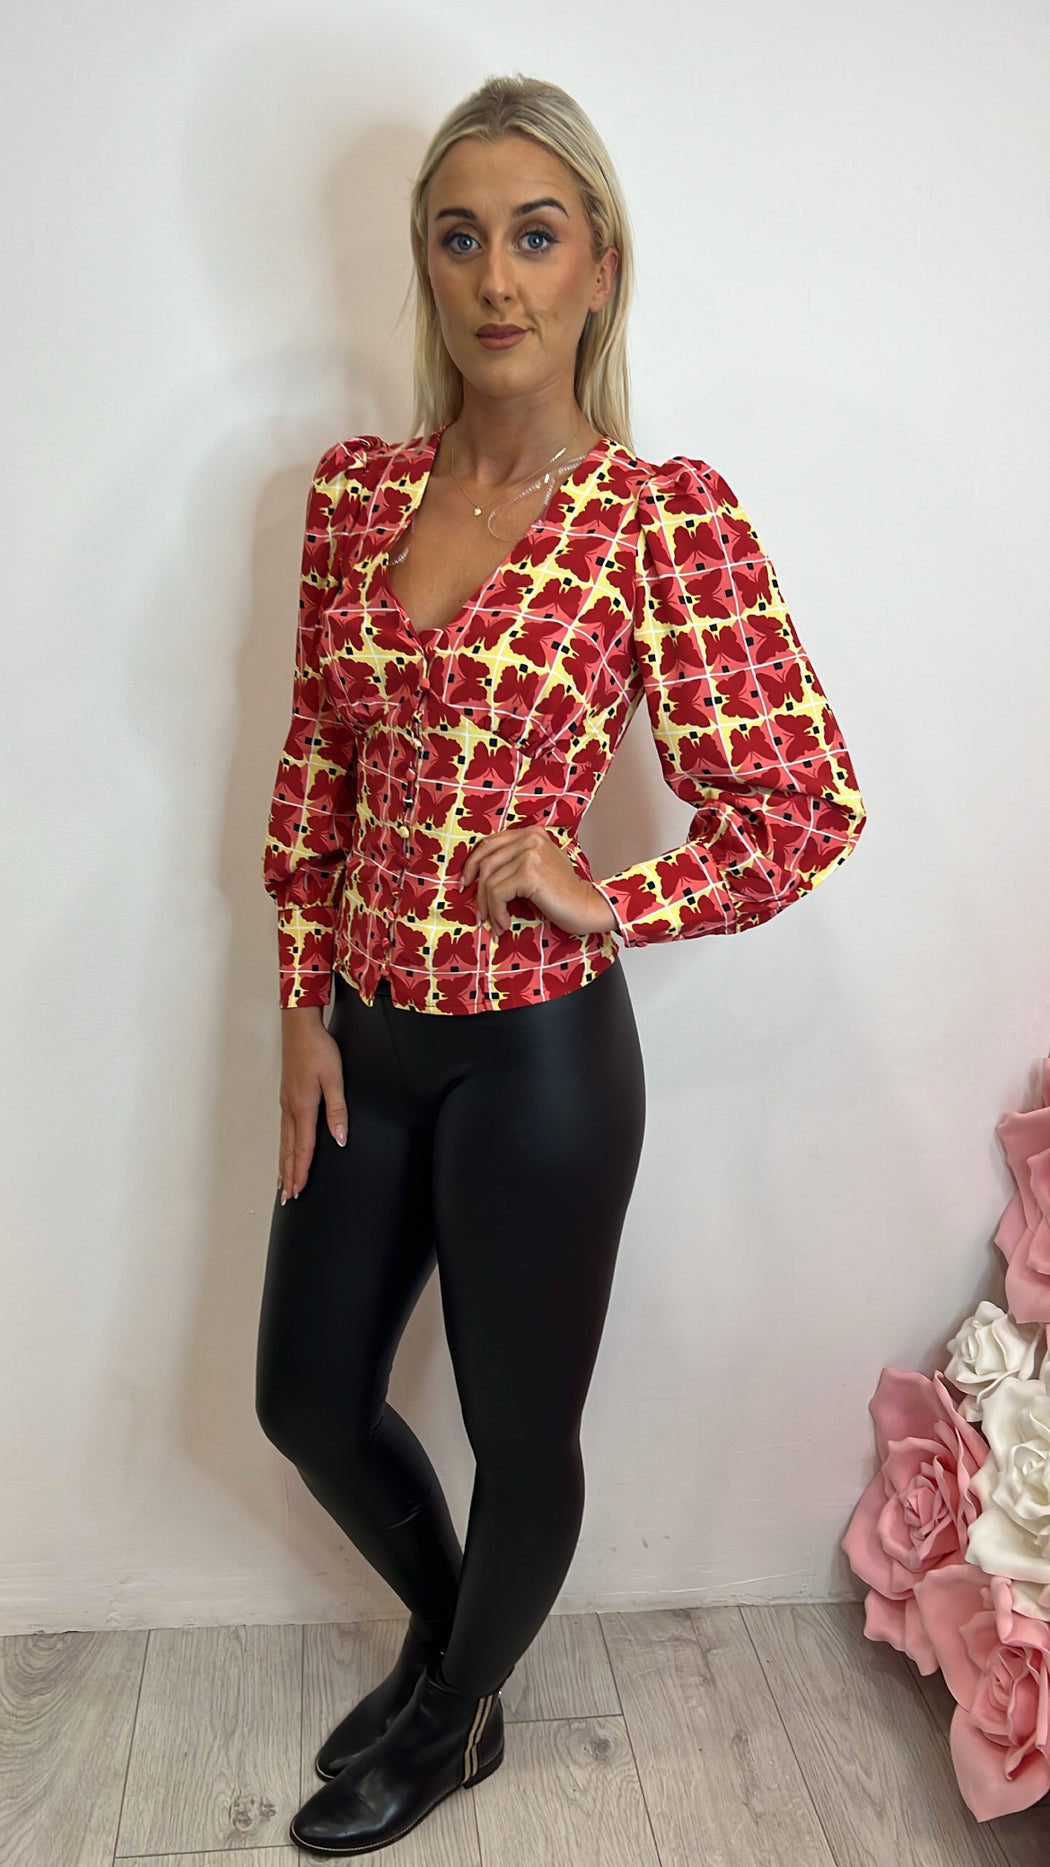 Ck5616 glam butterfly check top